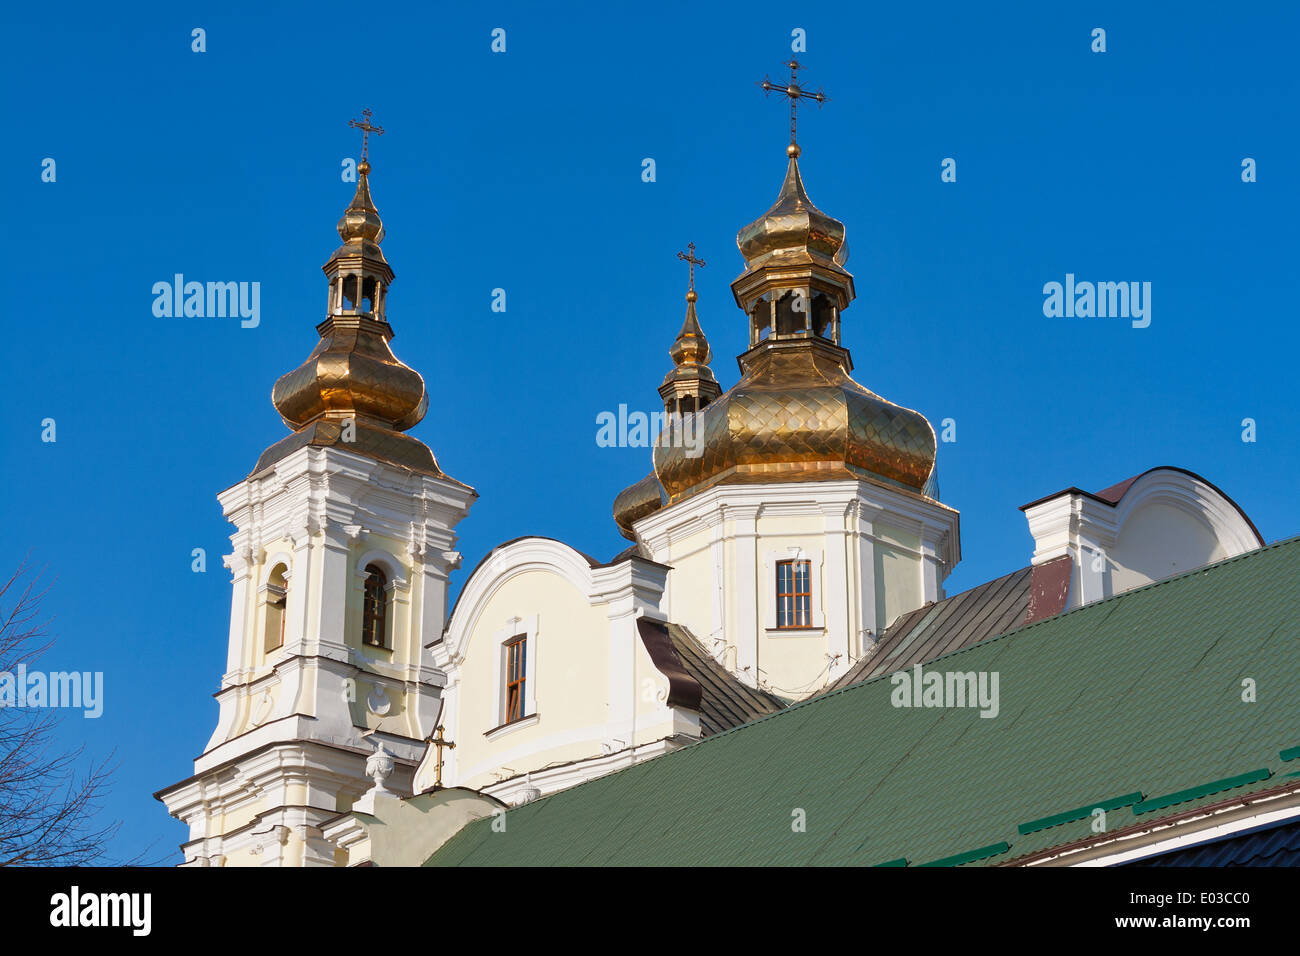 Domes of Transfiguration Cathedral in Vinnitsa, Ukraine. Built in 18th century. Stock Photo